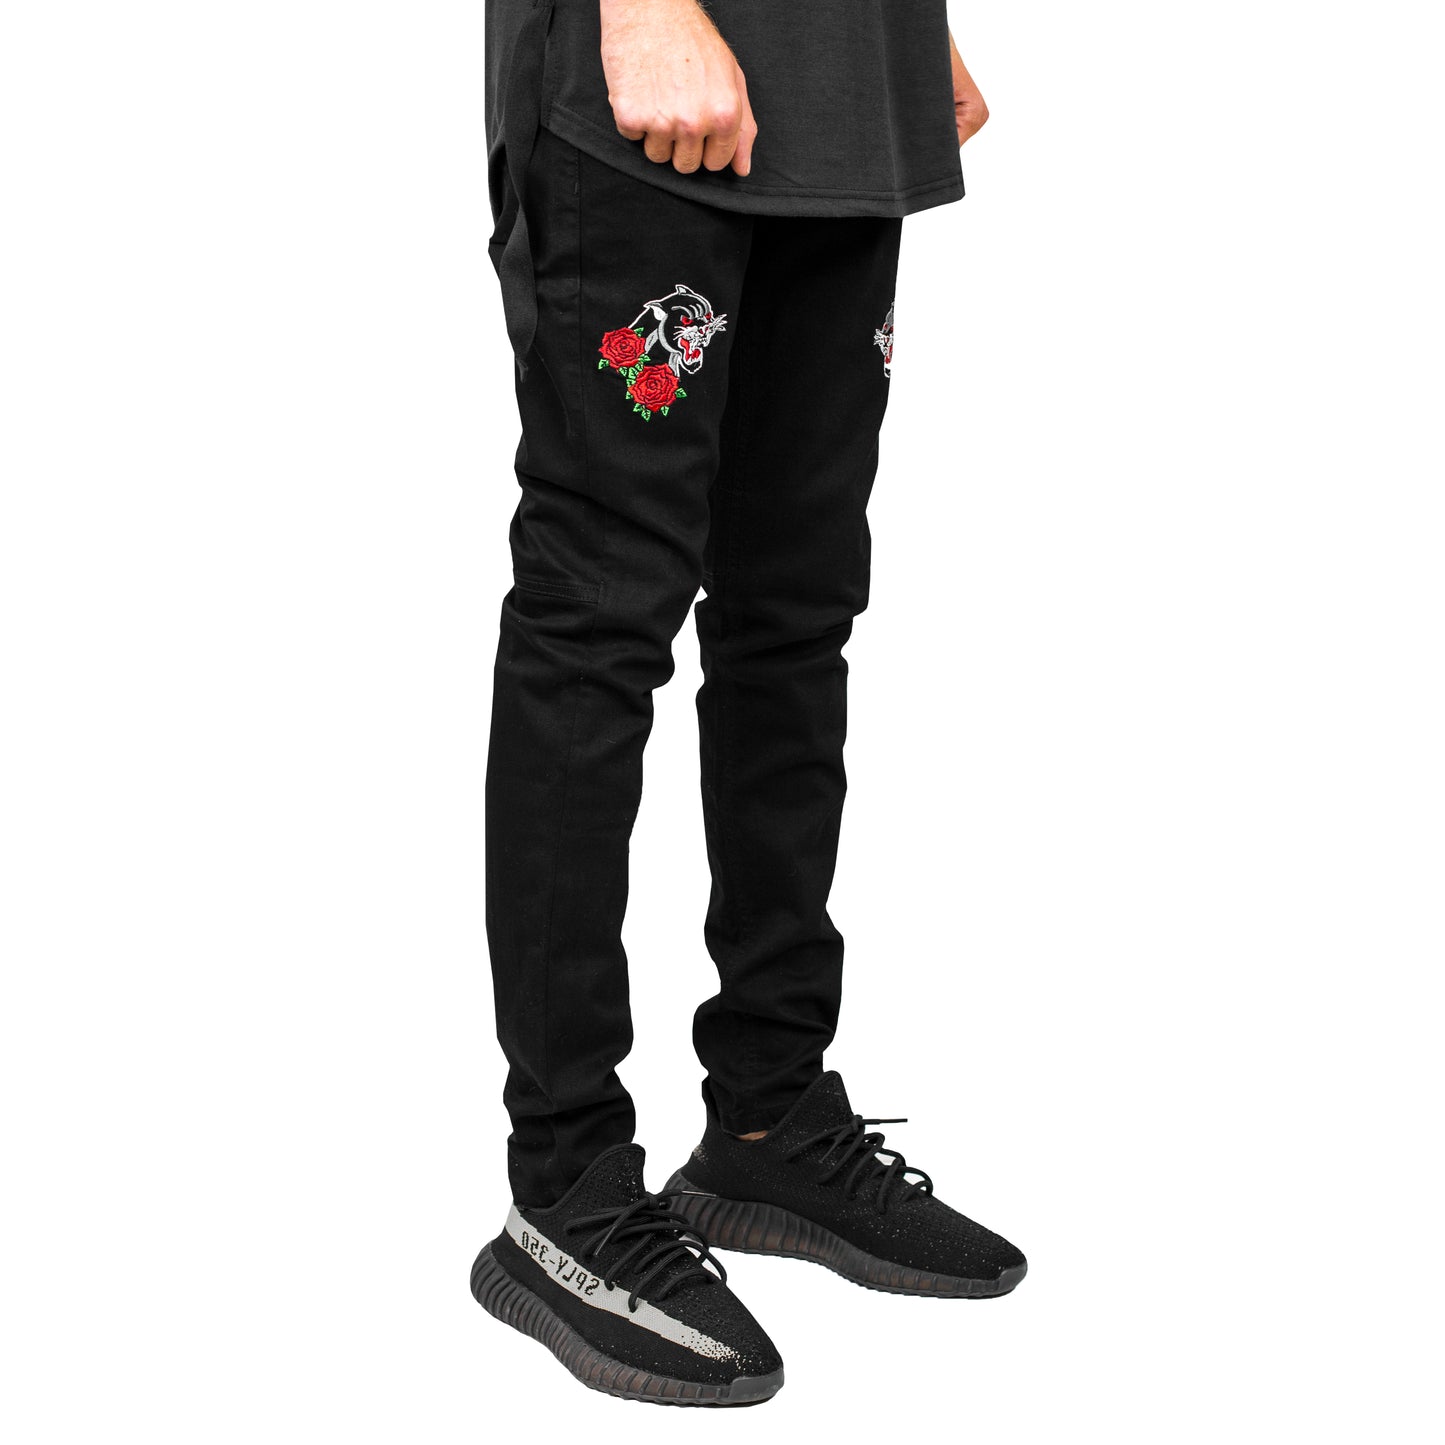 Panther Jeans : Black